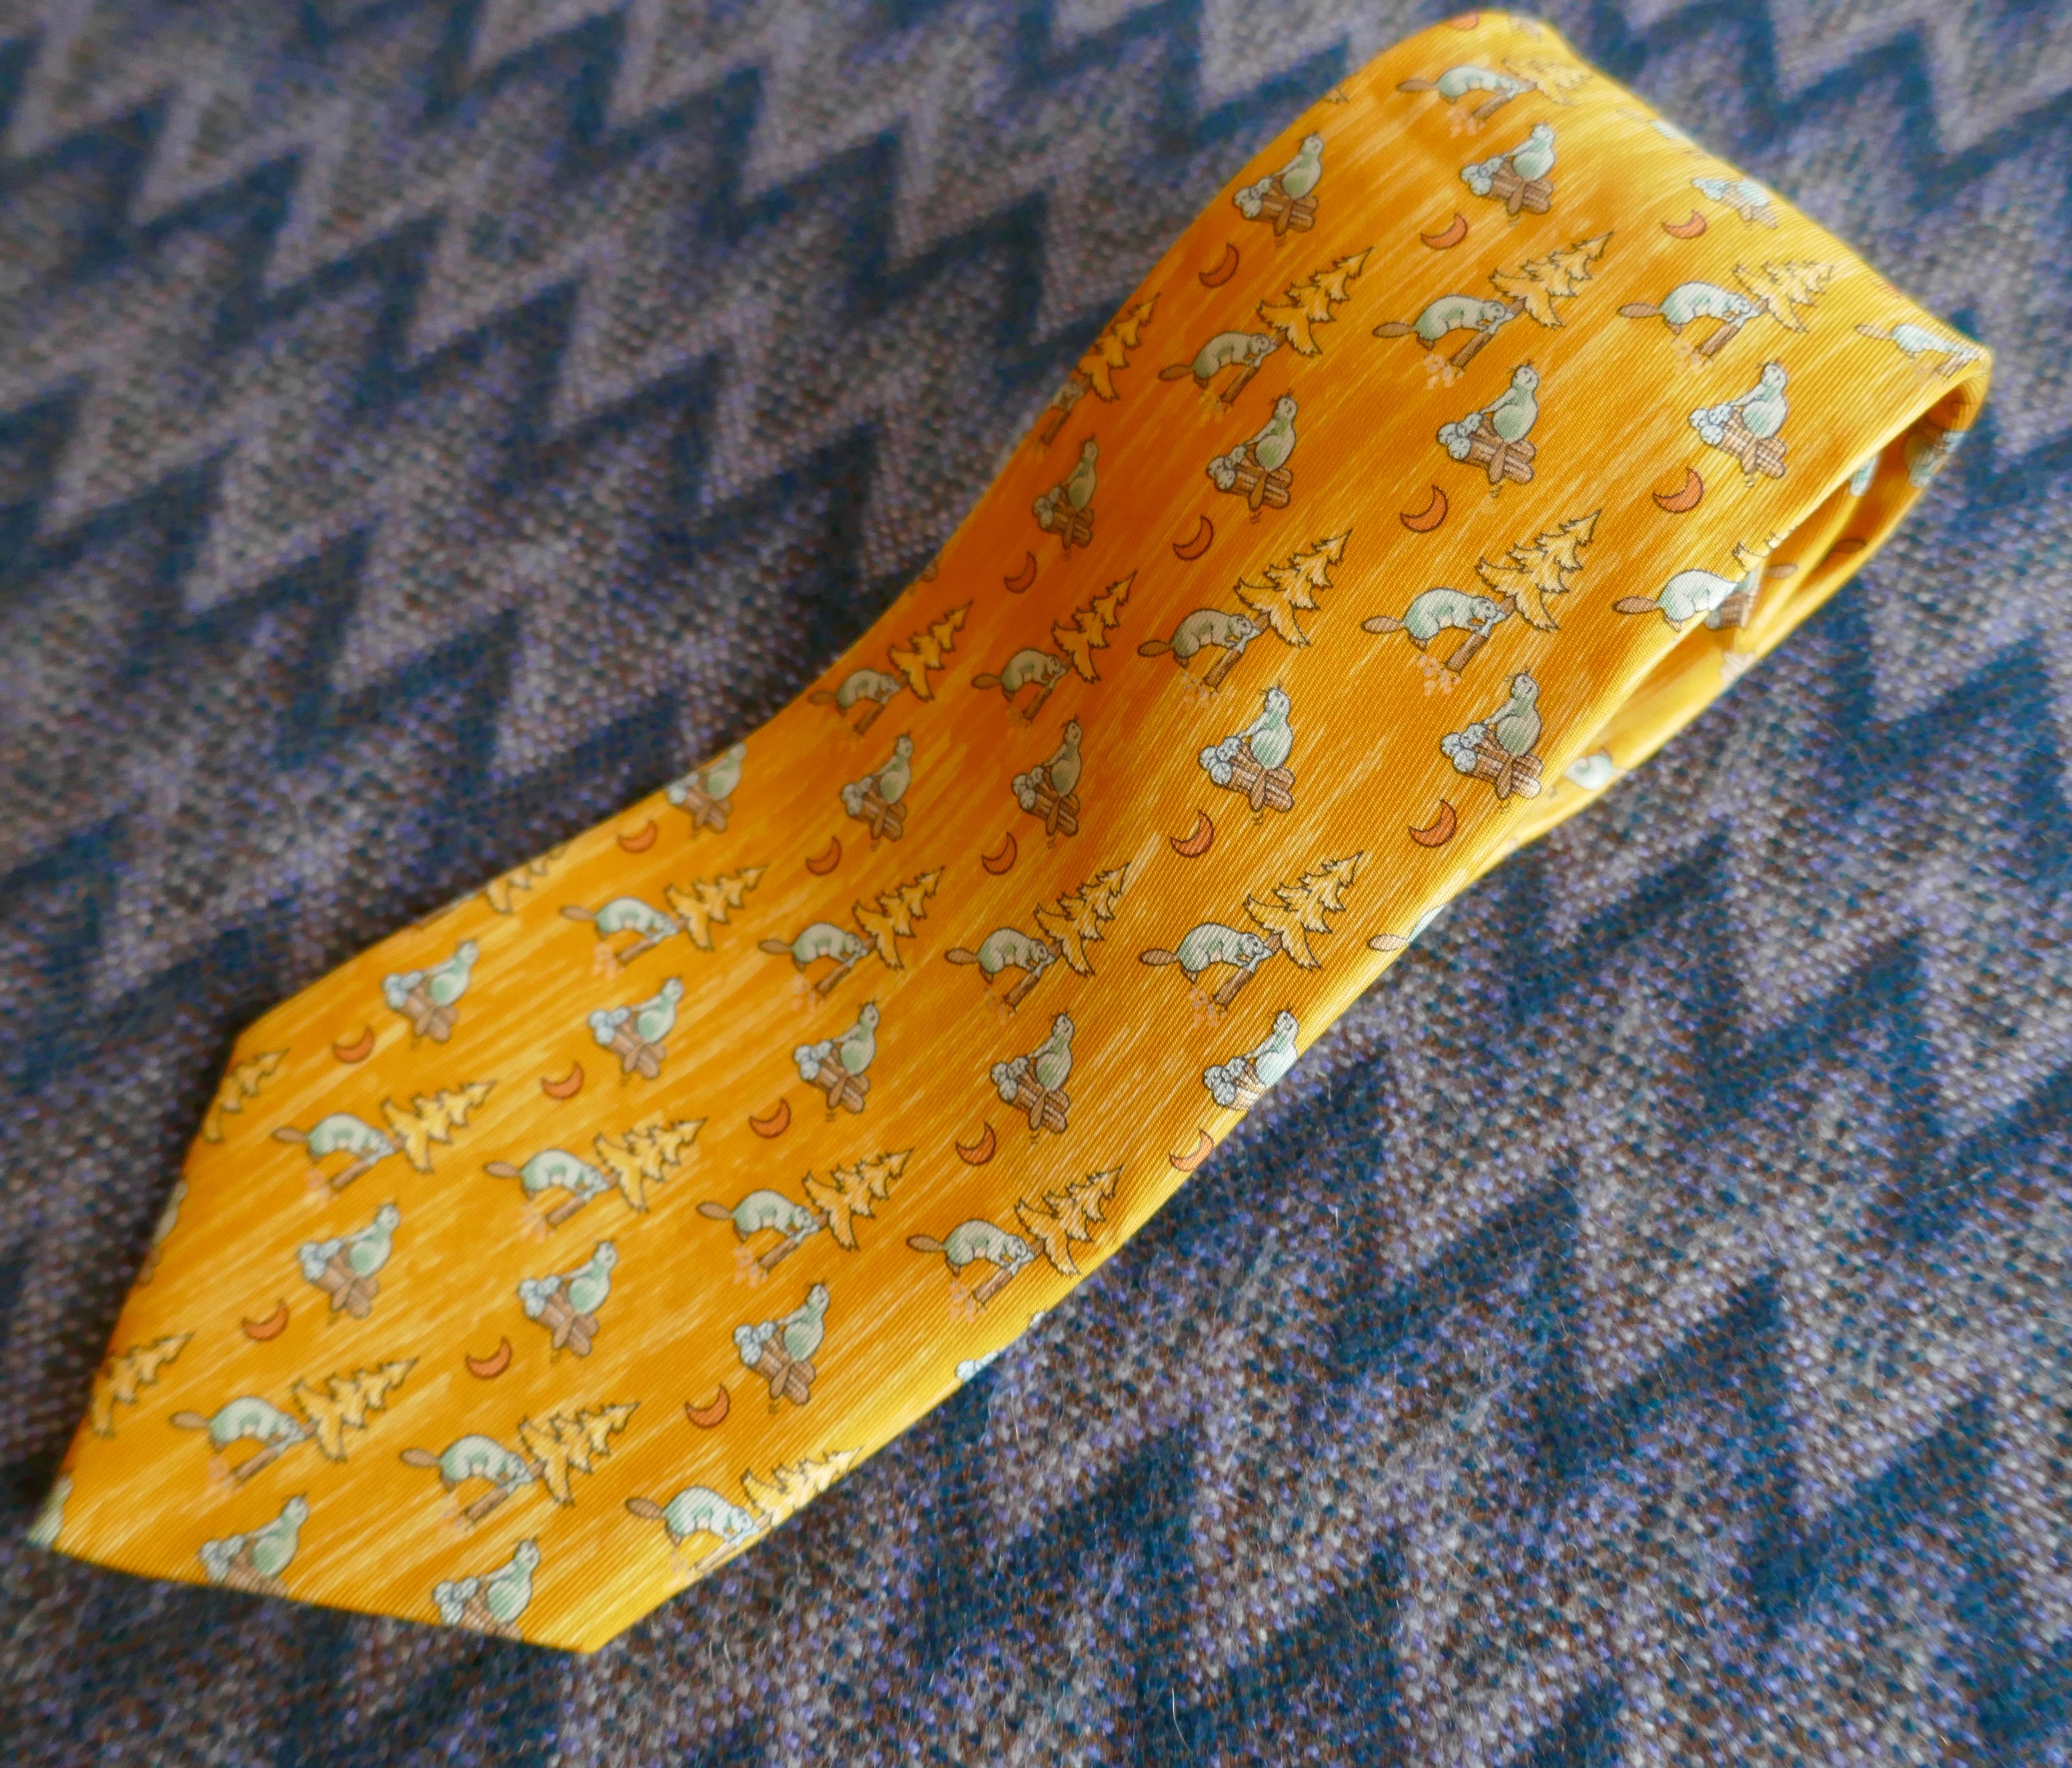 Rare Hermes Novelty Silk Tie, Beavers Felling Trees, Hermes Orange Pallet 

Classic Hermes All Over Winter design, Beavers felling trees
Hermes Orange pallet 
A Very Special tie, instantly recognisable as Hermes by those in the know
100% silk 
Silk